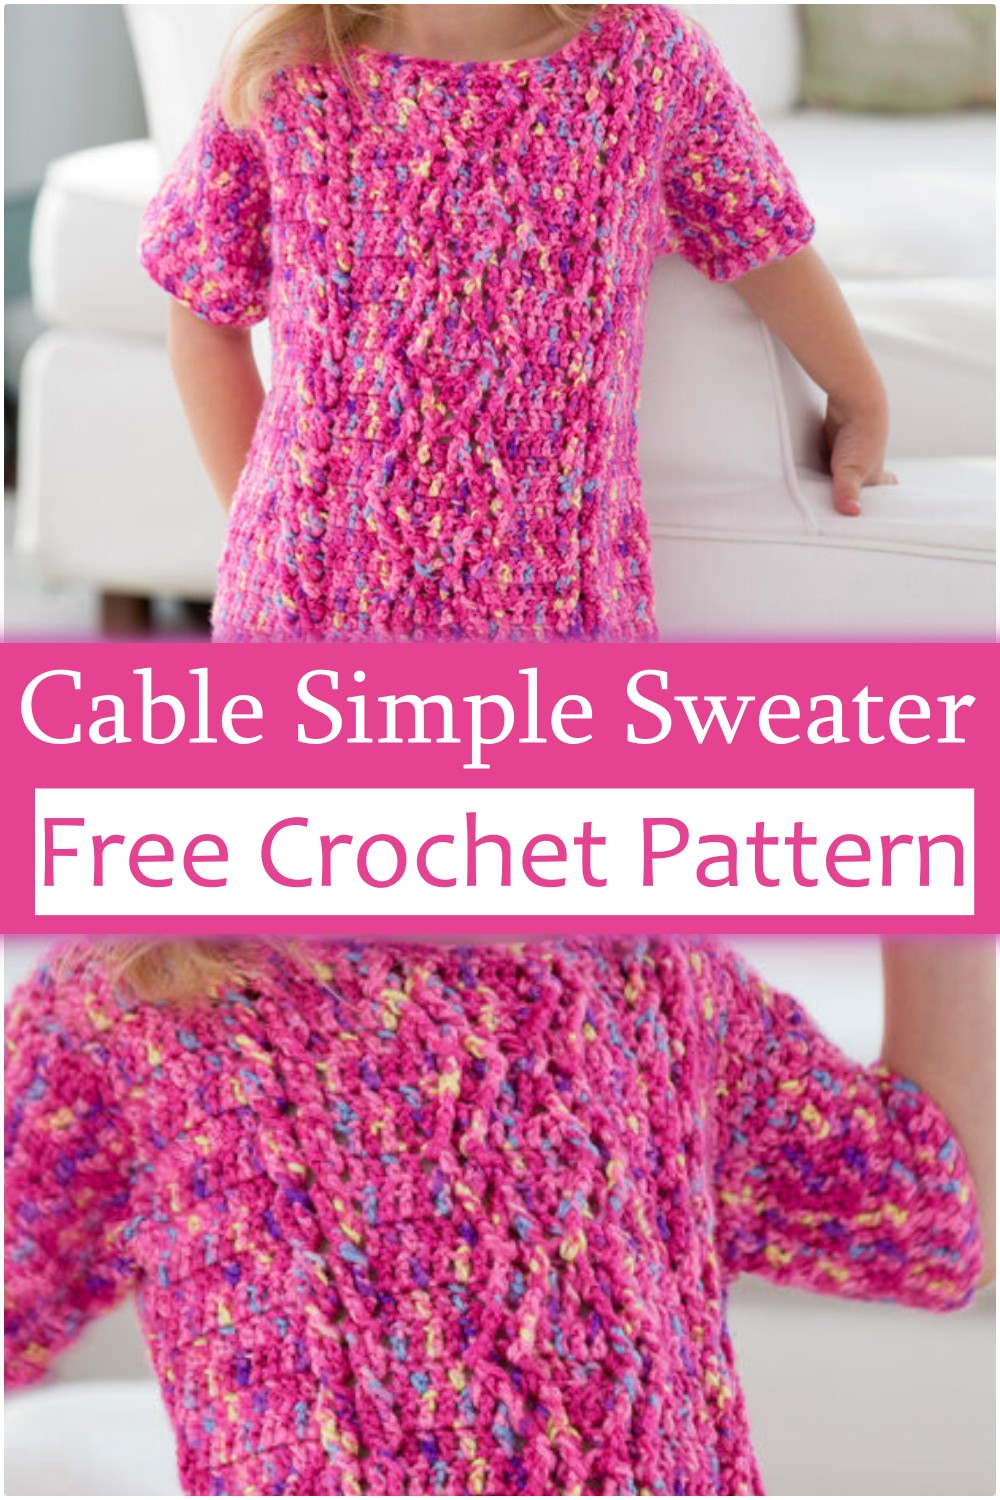 Cable Simple Crochet Sweater Pattern Free